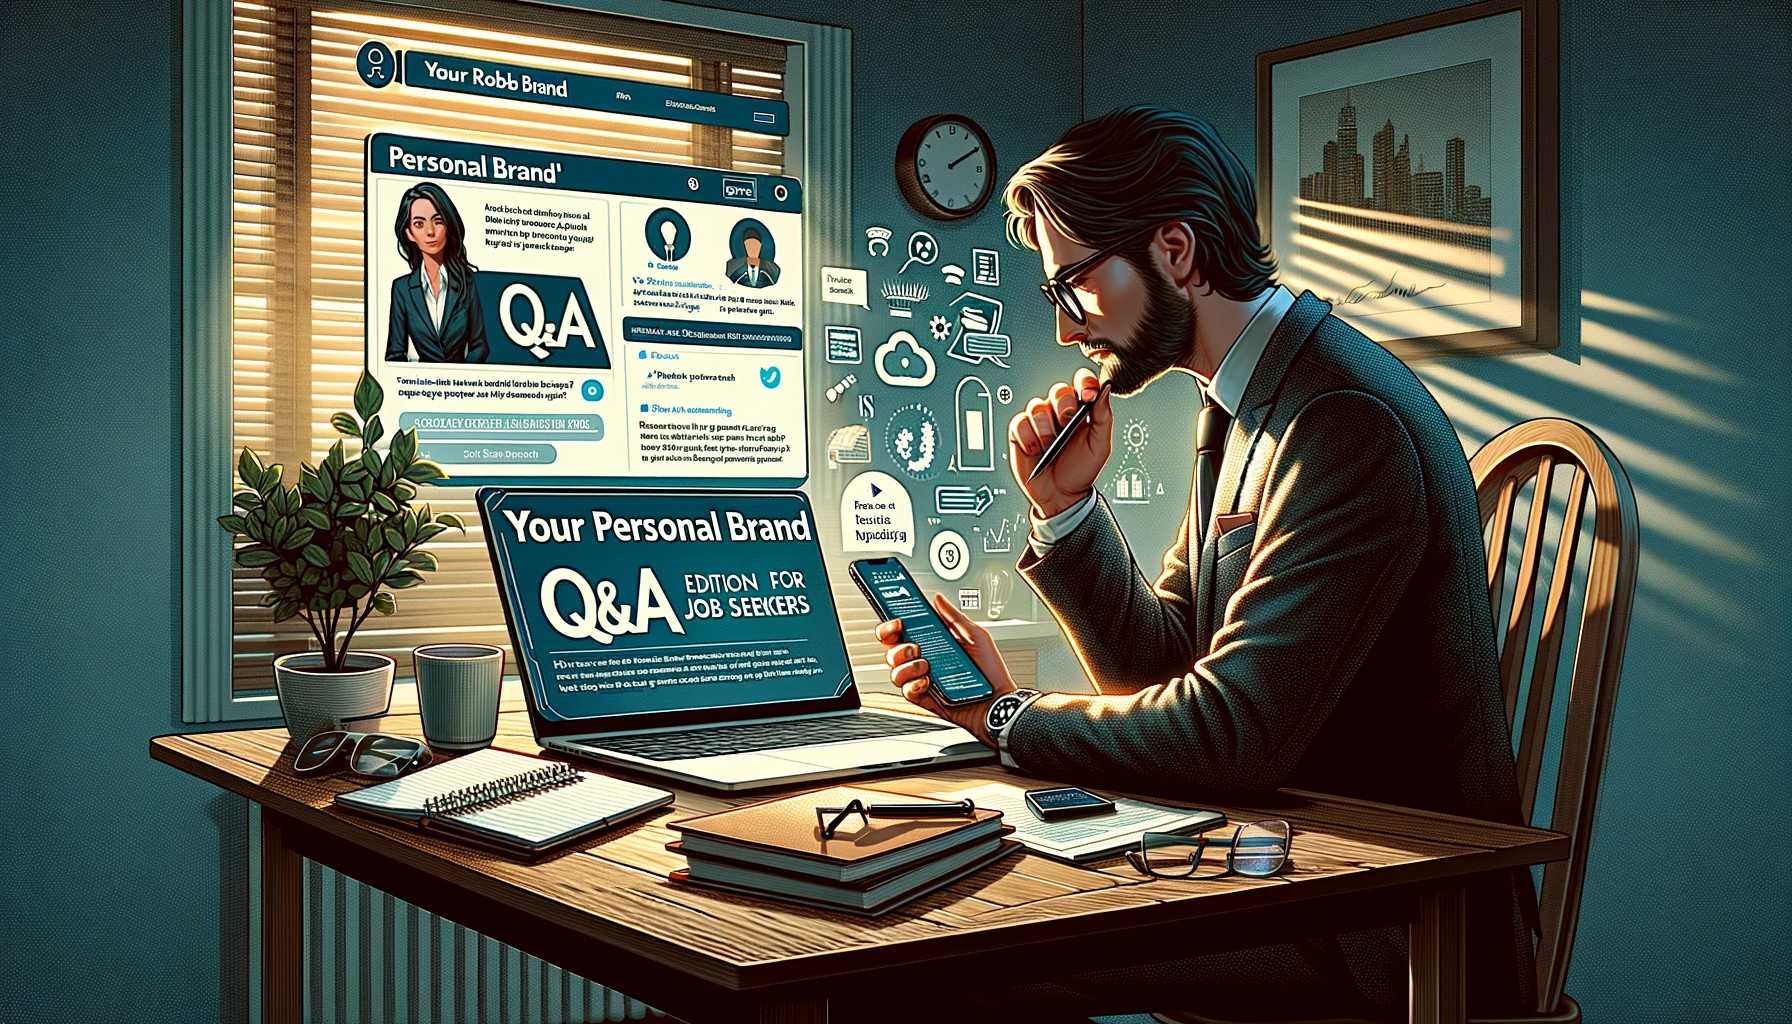 Your Personal Brand: Q&A Edition for Job Seekers